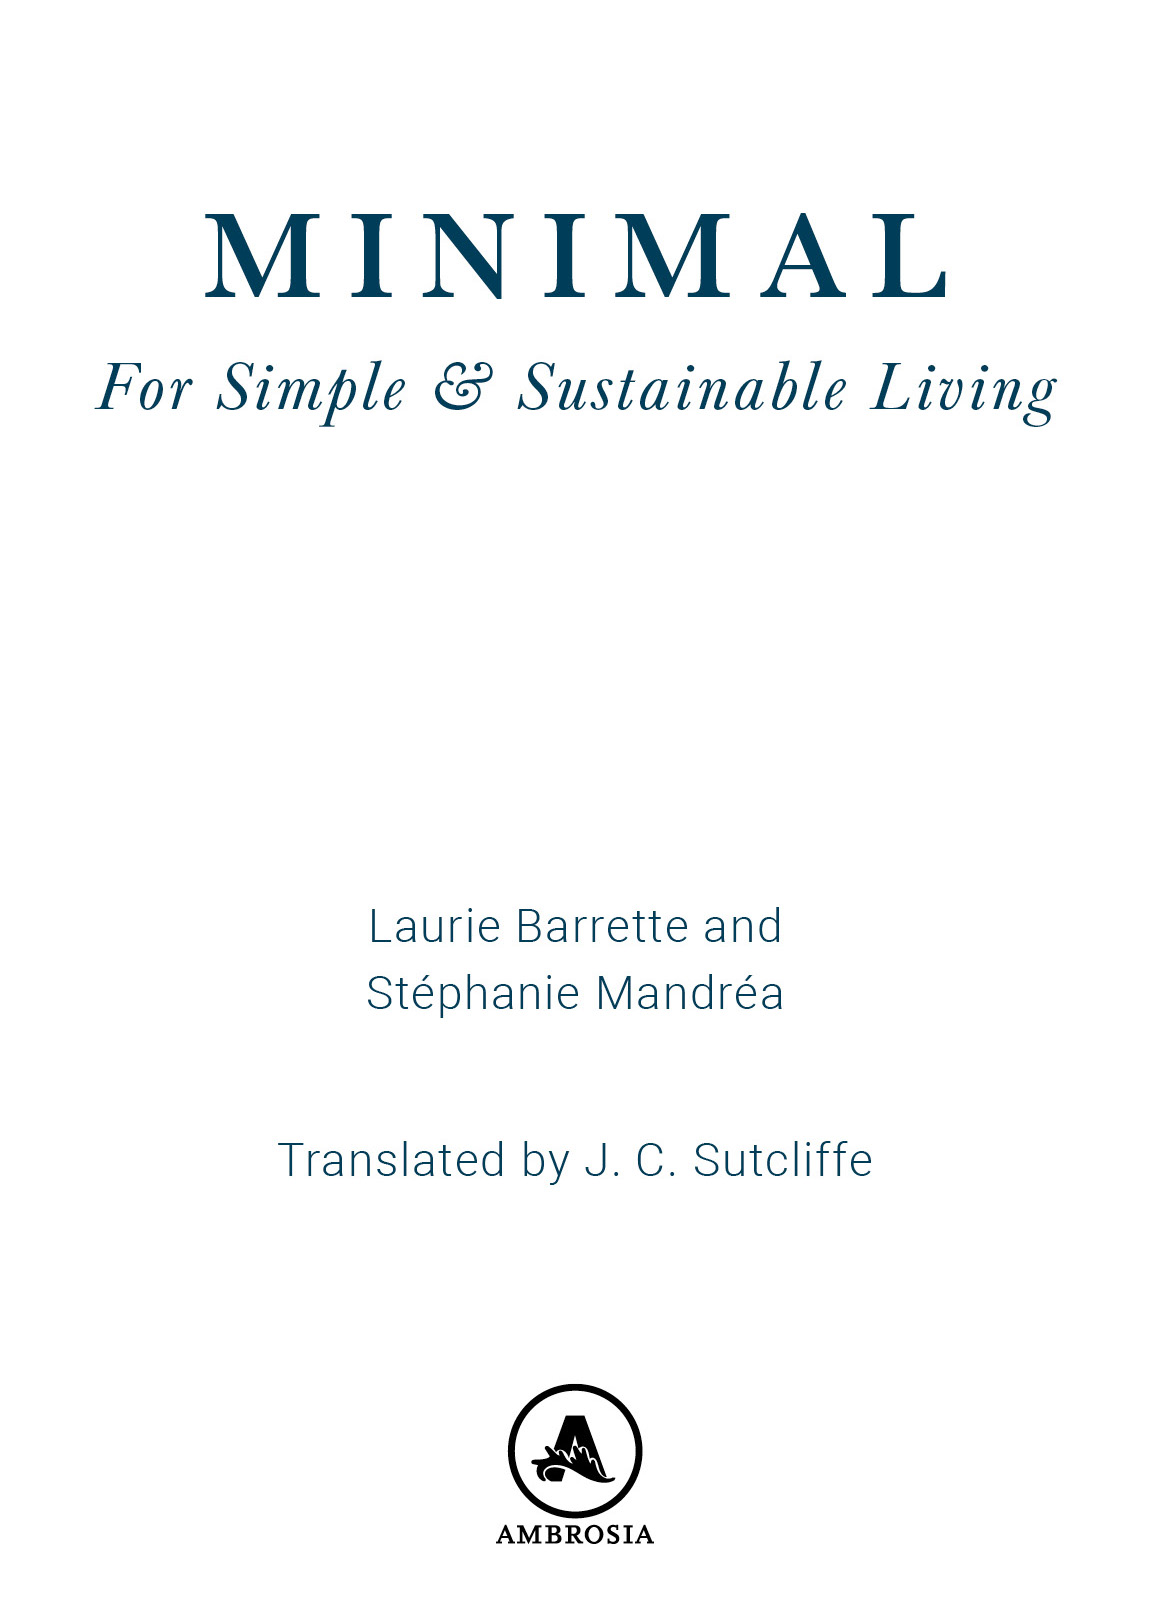 Contents Introduction The art of living Simple living Minimalism Zero waste - photo 3